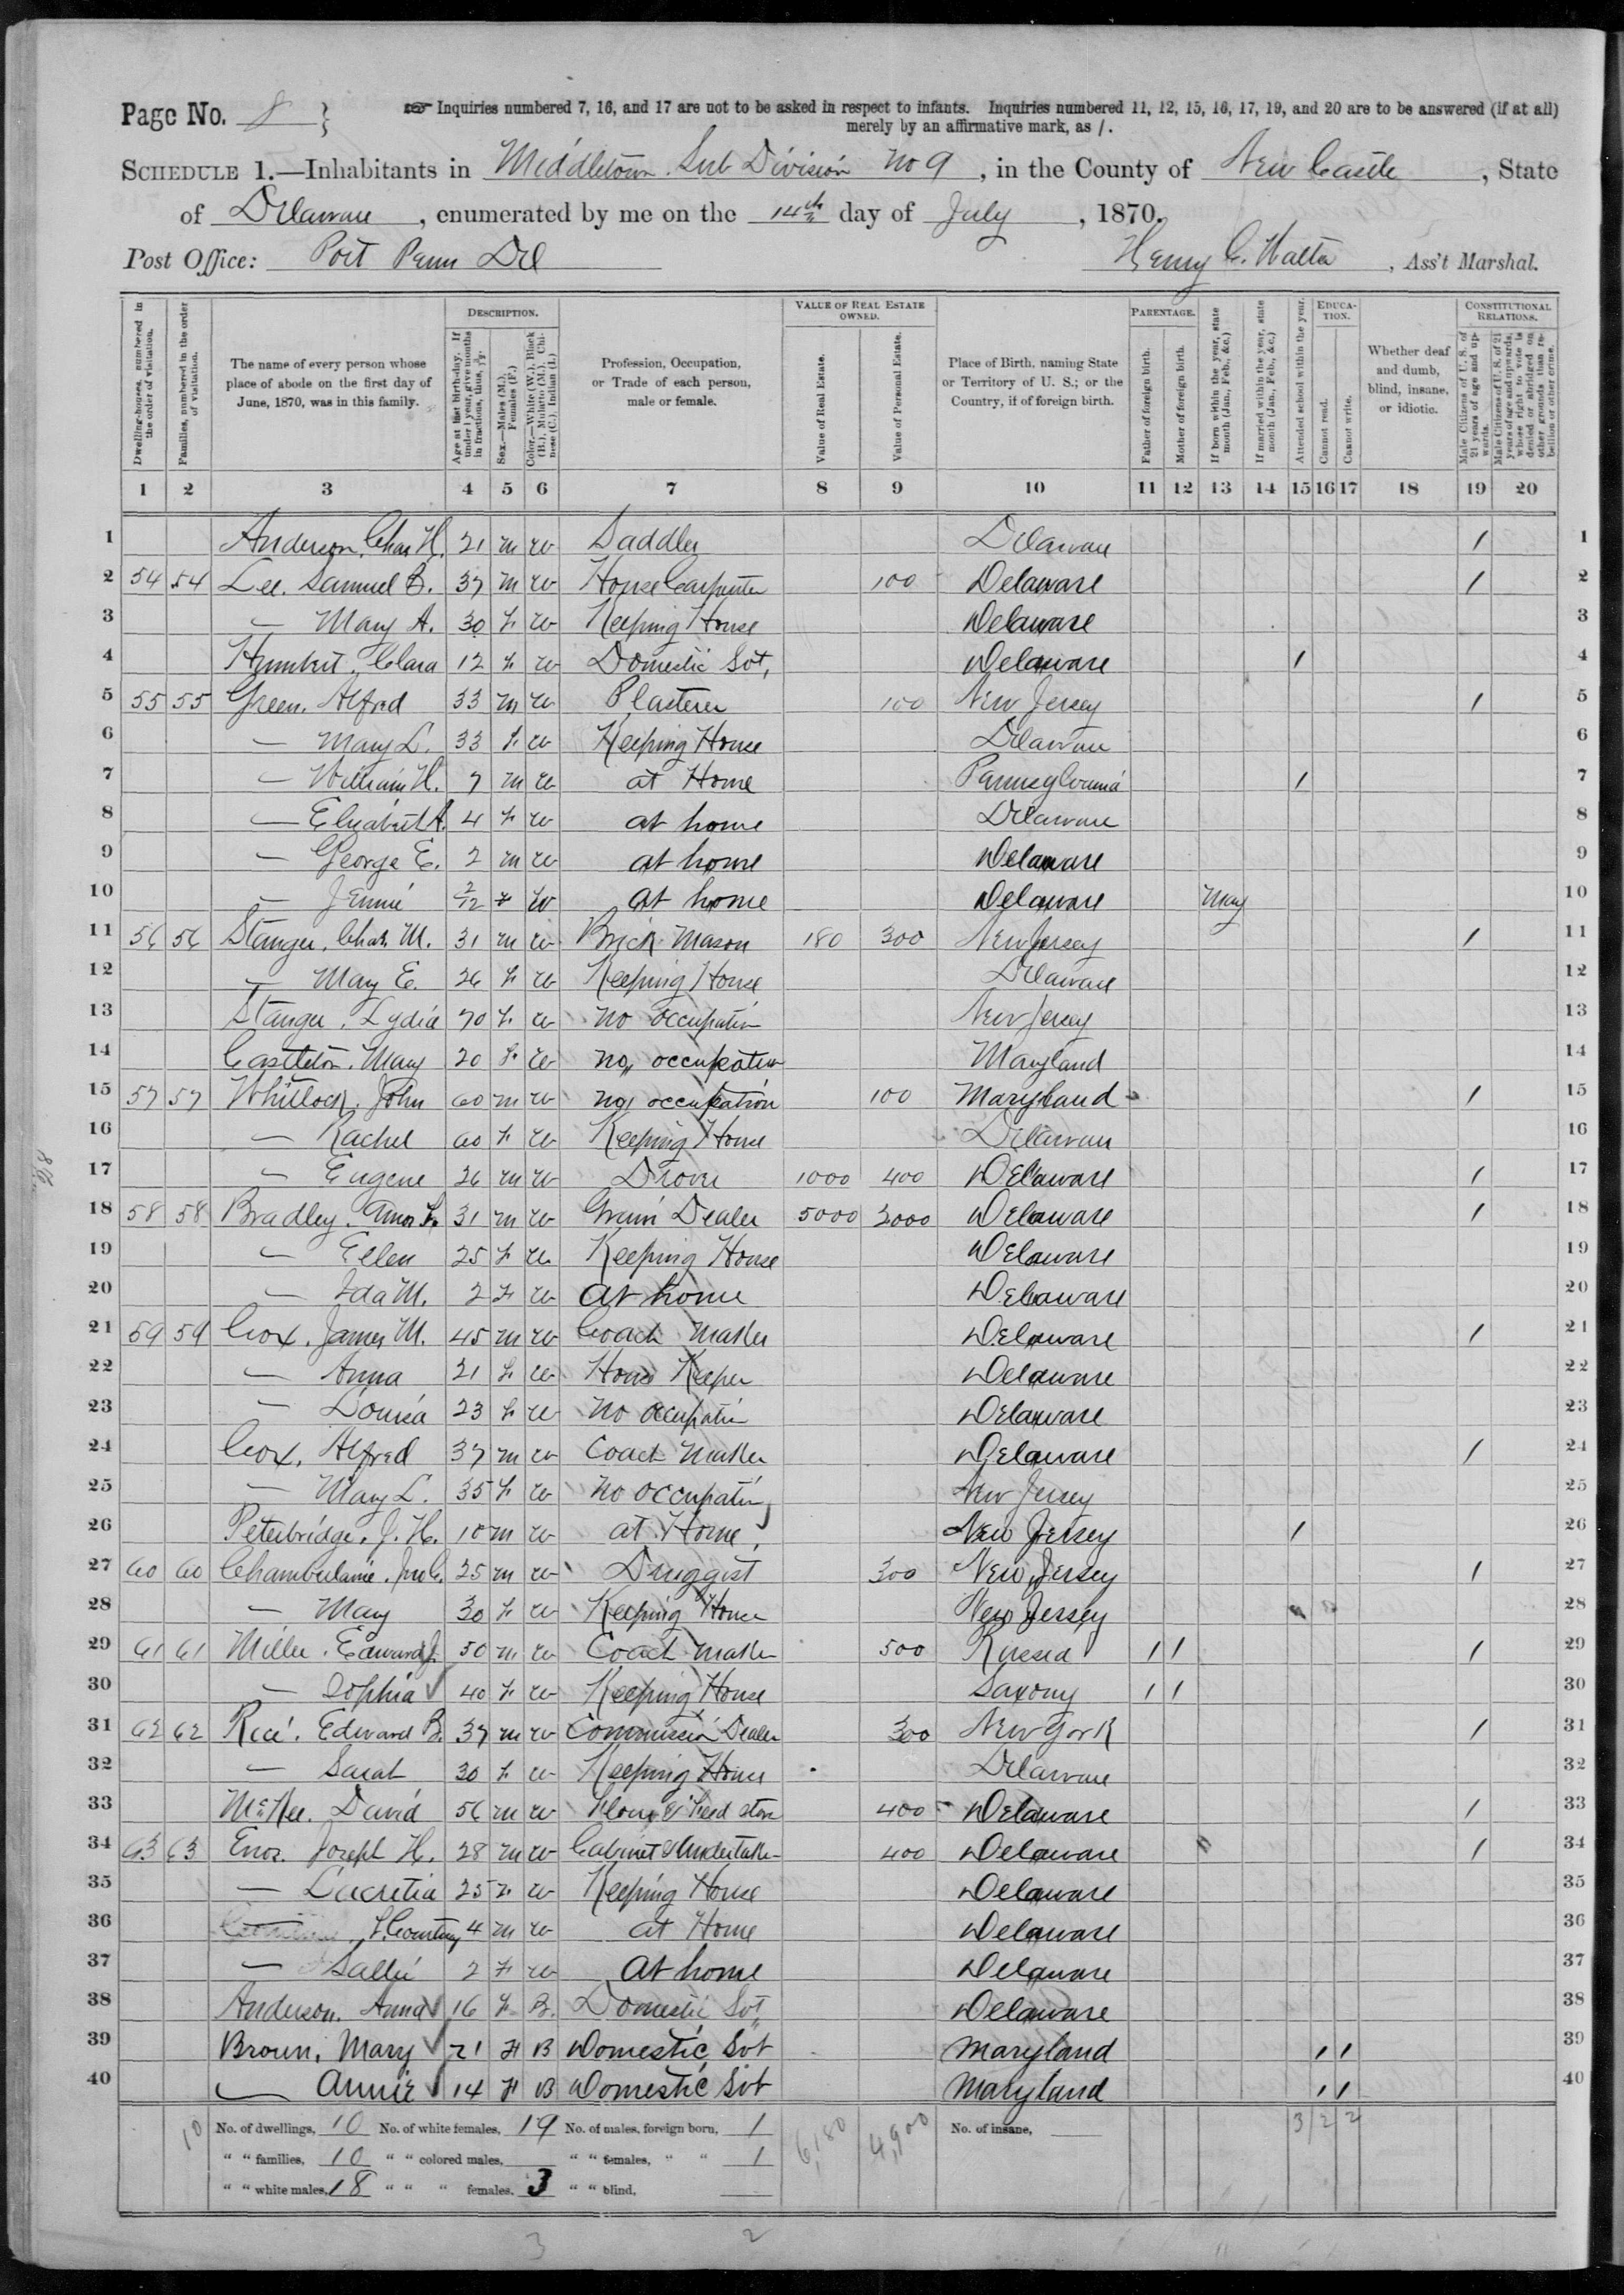 1870-CENSUS_USA-Delaware-NewCastle_Middletown_p8